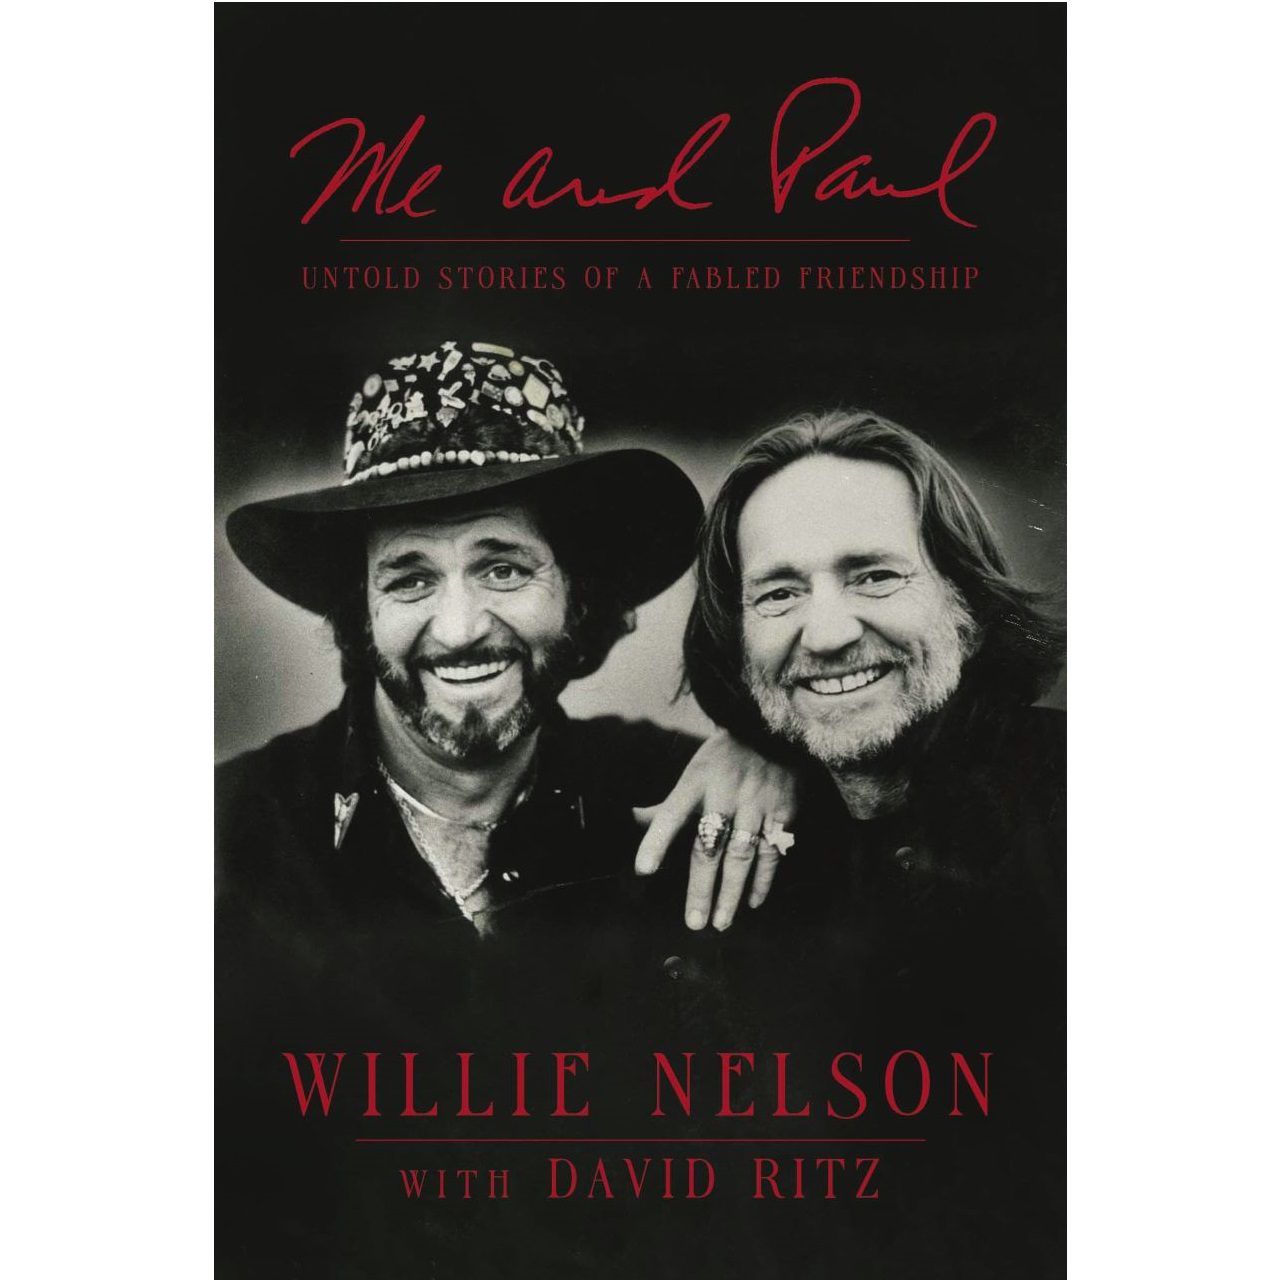 Willie Nelson - Me And Paul. Untold Tales of a Fabled Friendship (Harper Horizon) cover album